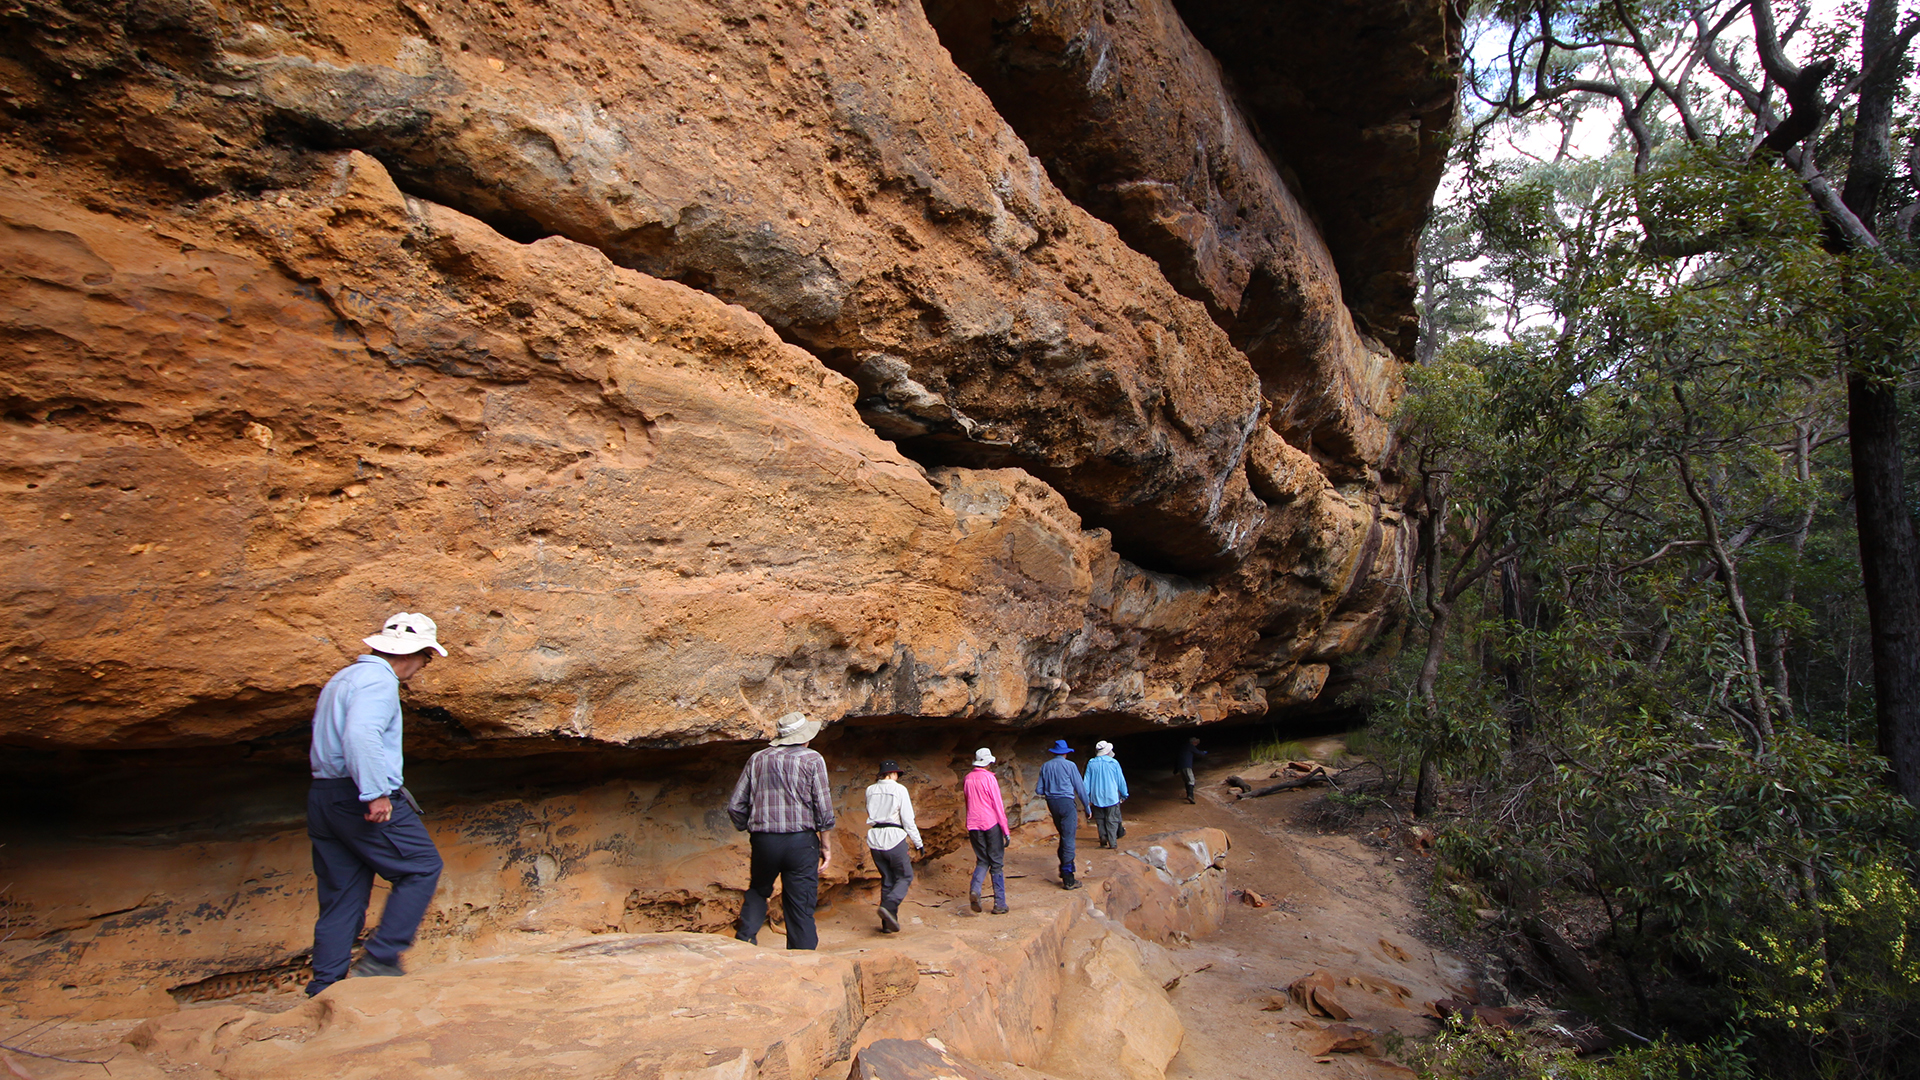 There are a huge number of overhangs in the Shoalhaven